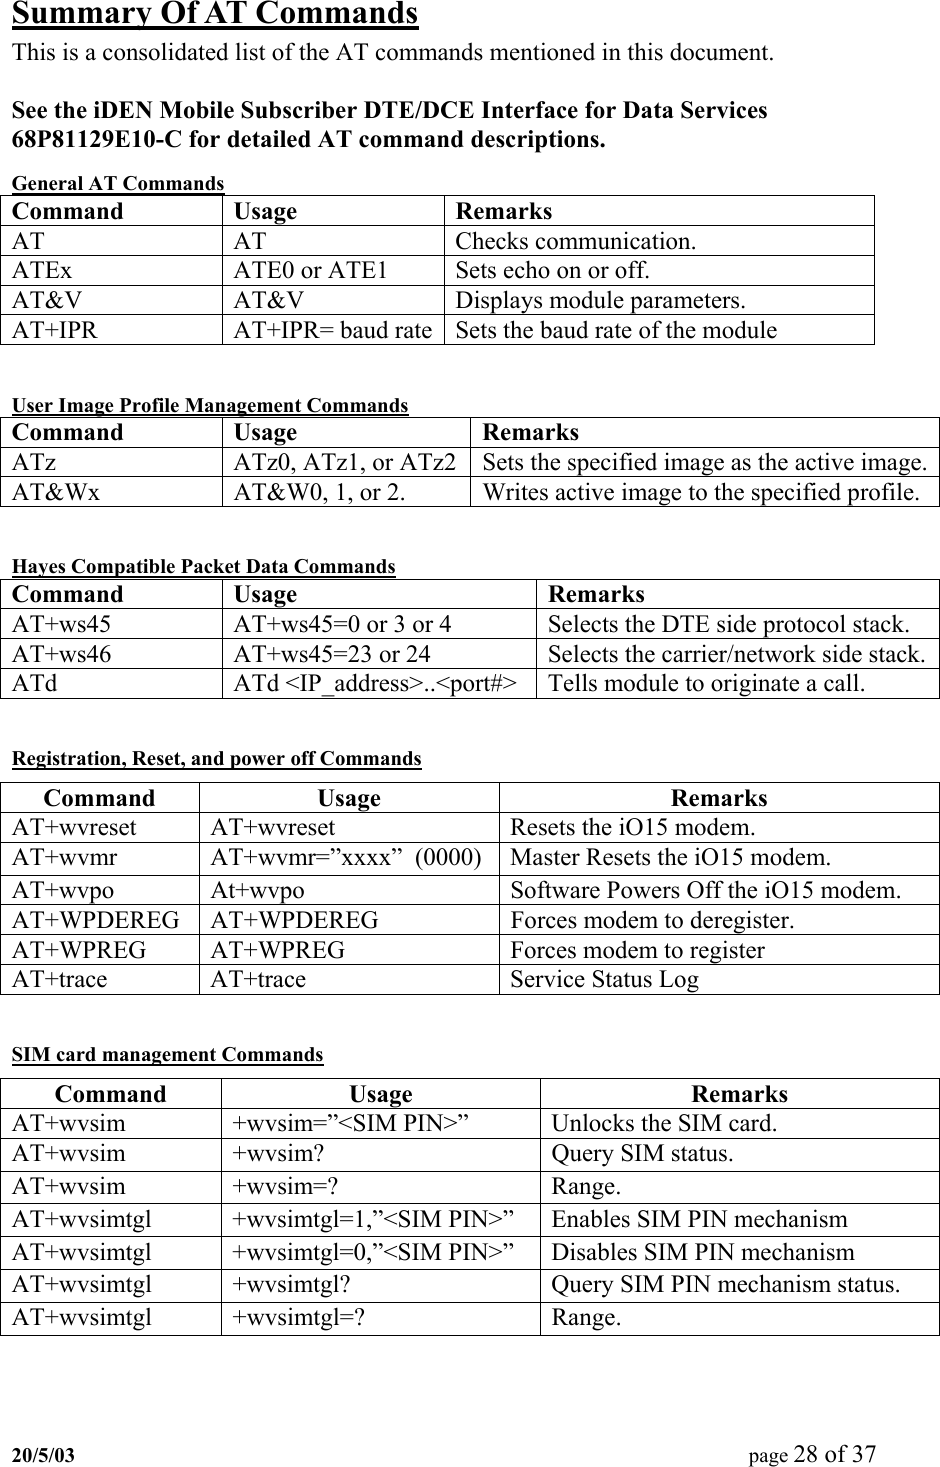 Summary Of AT Commands This is a consolidated list of the AT commands mentioned in this document.  See the iDEN Mobile Subscriber DTE/DCE Interface for Data Services 68P81129E10-C for detailed AT command descriptions. General AT Commands Command Usage  Remarks AT AT Checks communication. ATEx  ATE0 or ATE1  Sets echo on or off. AT&amp;V AT&amp;V Displays module parameters. AT+IPR  AT+IPR= baud rate Sets the baud rate of the module  User Image Profile Management Commands Command Usage  Remarks ATz  ATz0, ATz1, or ATz2  Sets the specified image as the active image.AT&amp;Wx  AT&amp;W0, 1, or 2.  Writes active image to the specified profile.  Hayes Compatible Packet Data Commands Command Usage  Remarks AT+ws45  AT+ws45=0 or 3 or 4  Selects the DTE side protocol stack. AT+ws46  AT+ws45=23 or 24  Selects the carrier/network side stack. ATd  ATd &lt;IP_address&gt;..&lt;port#&gt;  Tells module to originate a call.  Registration, Reset, and power off Commands Command Usage  Remarks AT+wvreset AT+wvreset  Resets the iO15 modem. AT+wvmr   AT+wvmr=”xxxx”  (0000)  Master Resets the iO15 modem. AT+wvpo  At+wvpo  Software Powers Off the iO15 modem. AT+WPDEREG  AT+WPDEREG  Forces modem to deregister. AT+WPREG AT+WPREG  Forces modem to register AT+trace  AT+trace  Service Status Log   SIM card management Commands Command Usage  Remarks AT+wvsim  +wvsim=”&lt;SIM PIN&gt;”  Unlocks the SIM card. AT+wvsim +wvsim?  Query SIM status. AT+wvsim +wvsim=?  Range. AT+wvsimtgl  +wvsimtgl=1,”&lt;SIM PIN&gt;”  Enables SIM PIN mechanism AT+wvsimtgl  +wvsimtgl=0,”&lt;SIM PIN&gt;”  Disables SIM PIN mechanism AT+wvsimtgl  +wvsimtgl?  Query SIM PIN mechanism status. AT+wvsimtgl +wvsimtgl=?  Range.  20/5/03  page 28 of 37   